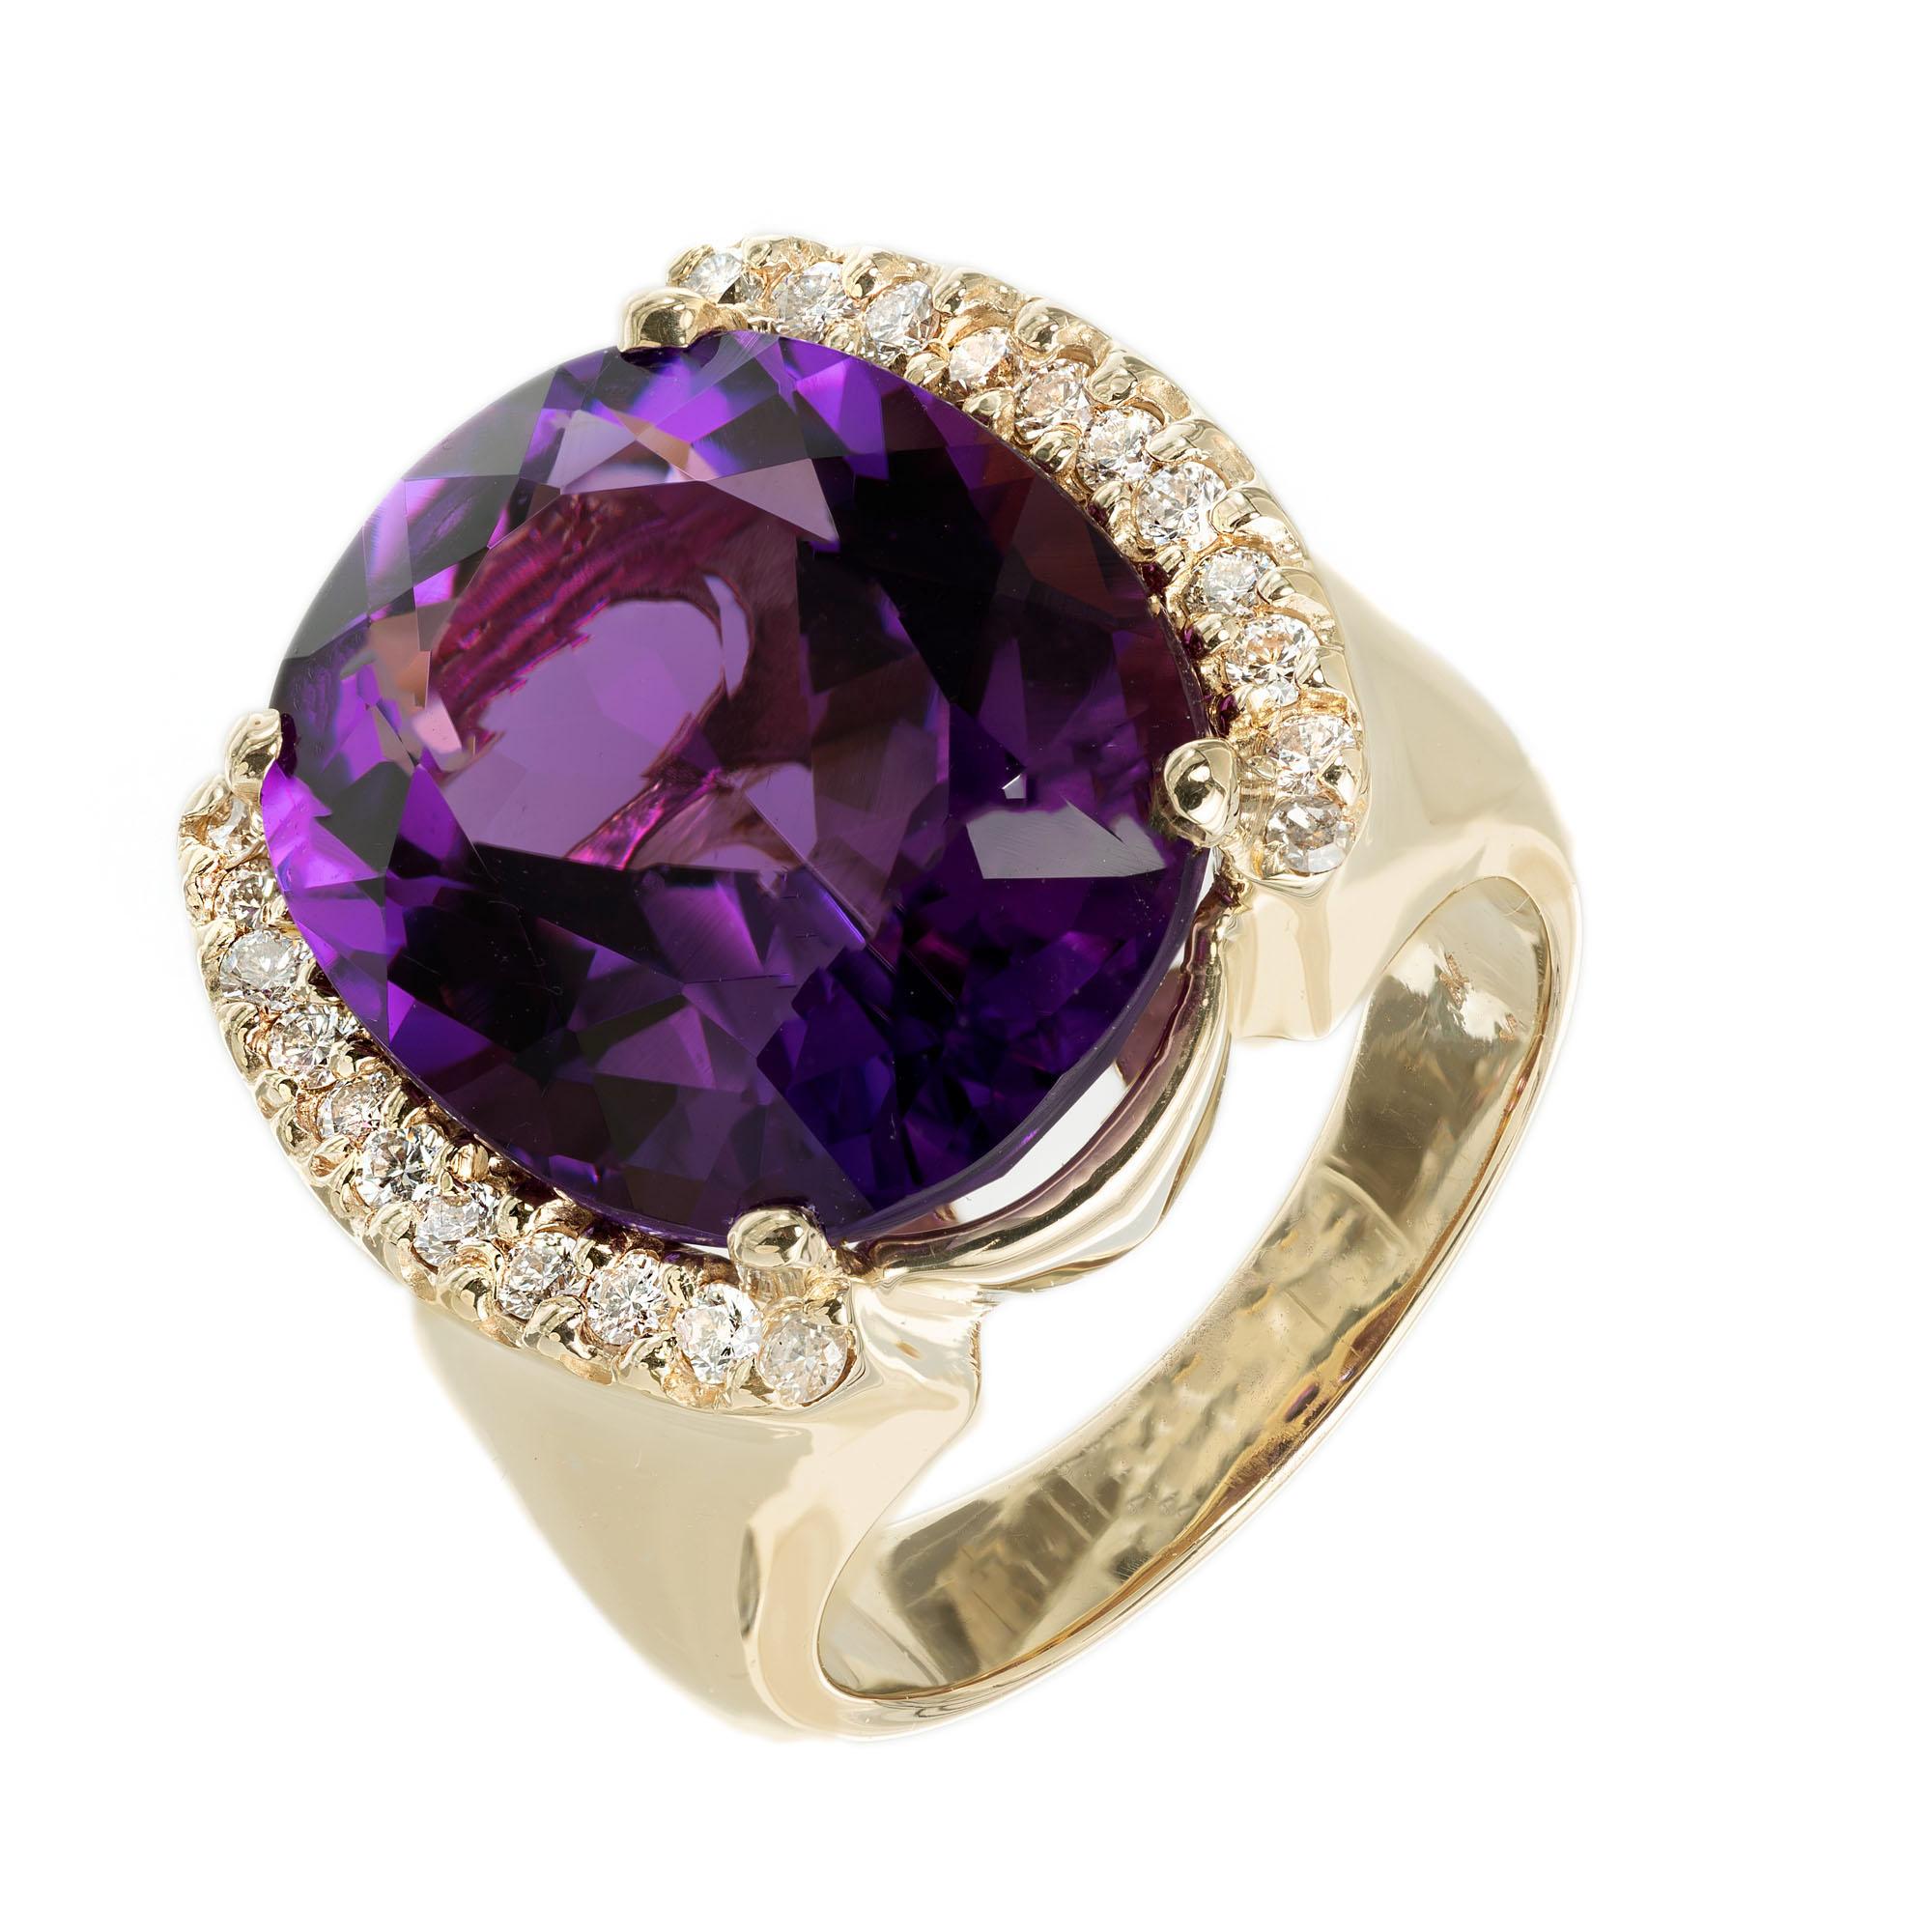 Amethyst and diamond cocktail ring. 12.31ct oval center amethyst with a half halo of diamonds in a 14k yellow gold cocktail ring setting. Circa 1970's. 

1 oval purple amethyst, VS2 approx. 12.31cts
22 round brilliant cut diamonds, H-I VS approx.